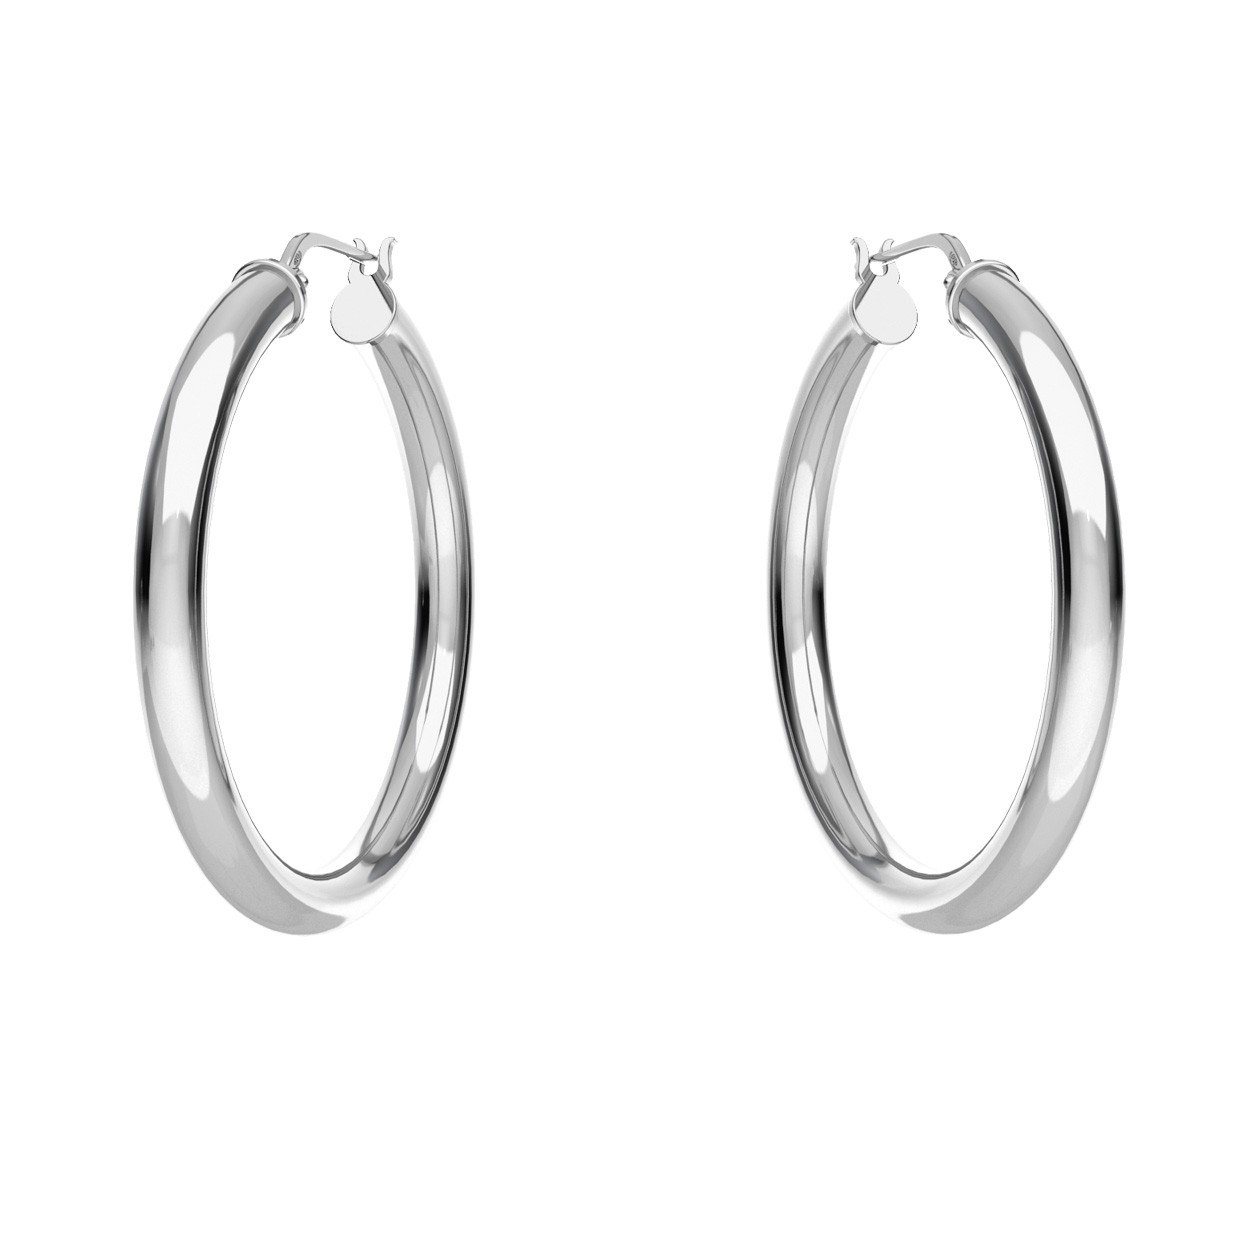 Round hoop earrings 4 cm with clasp, silver 925